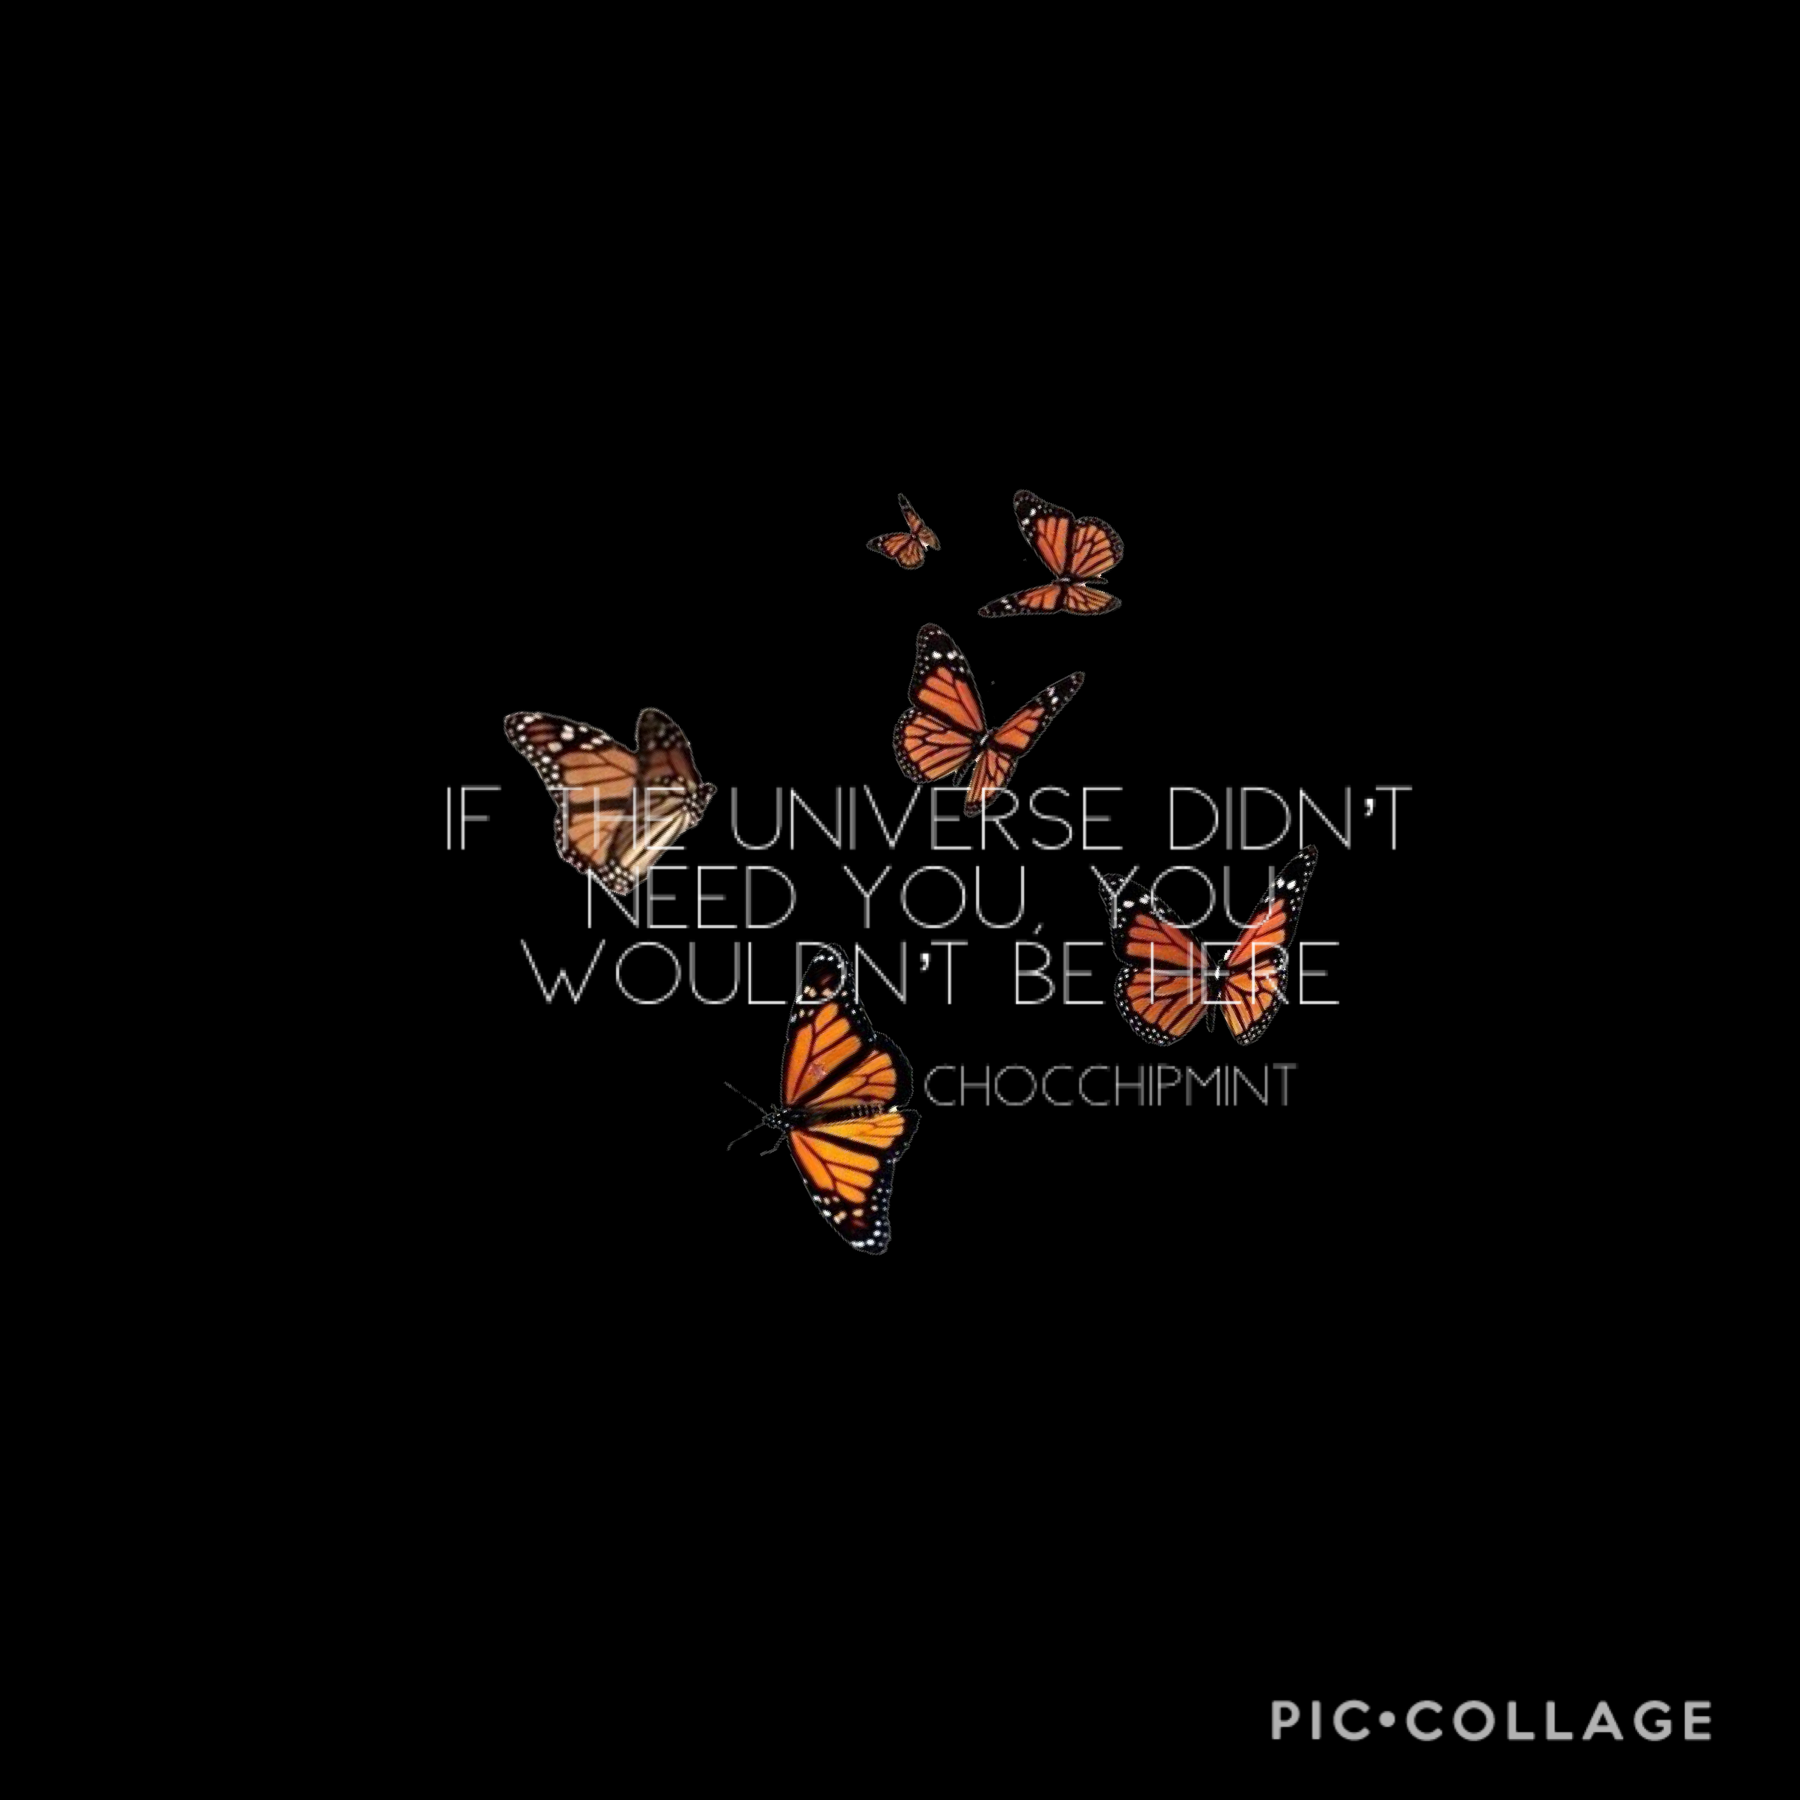 🦋tap🦋

rate this from 1-10 in the comments! Don’t be afraid to rate it whatever you want because it really helps 🧡